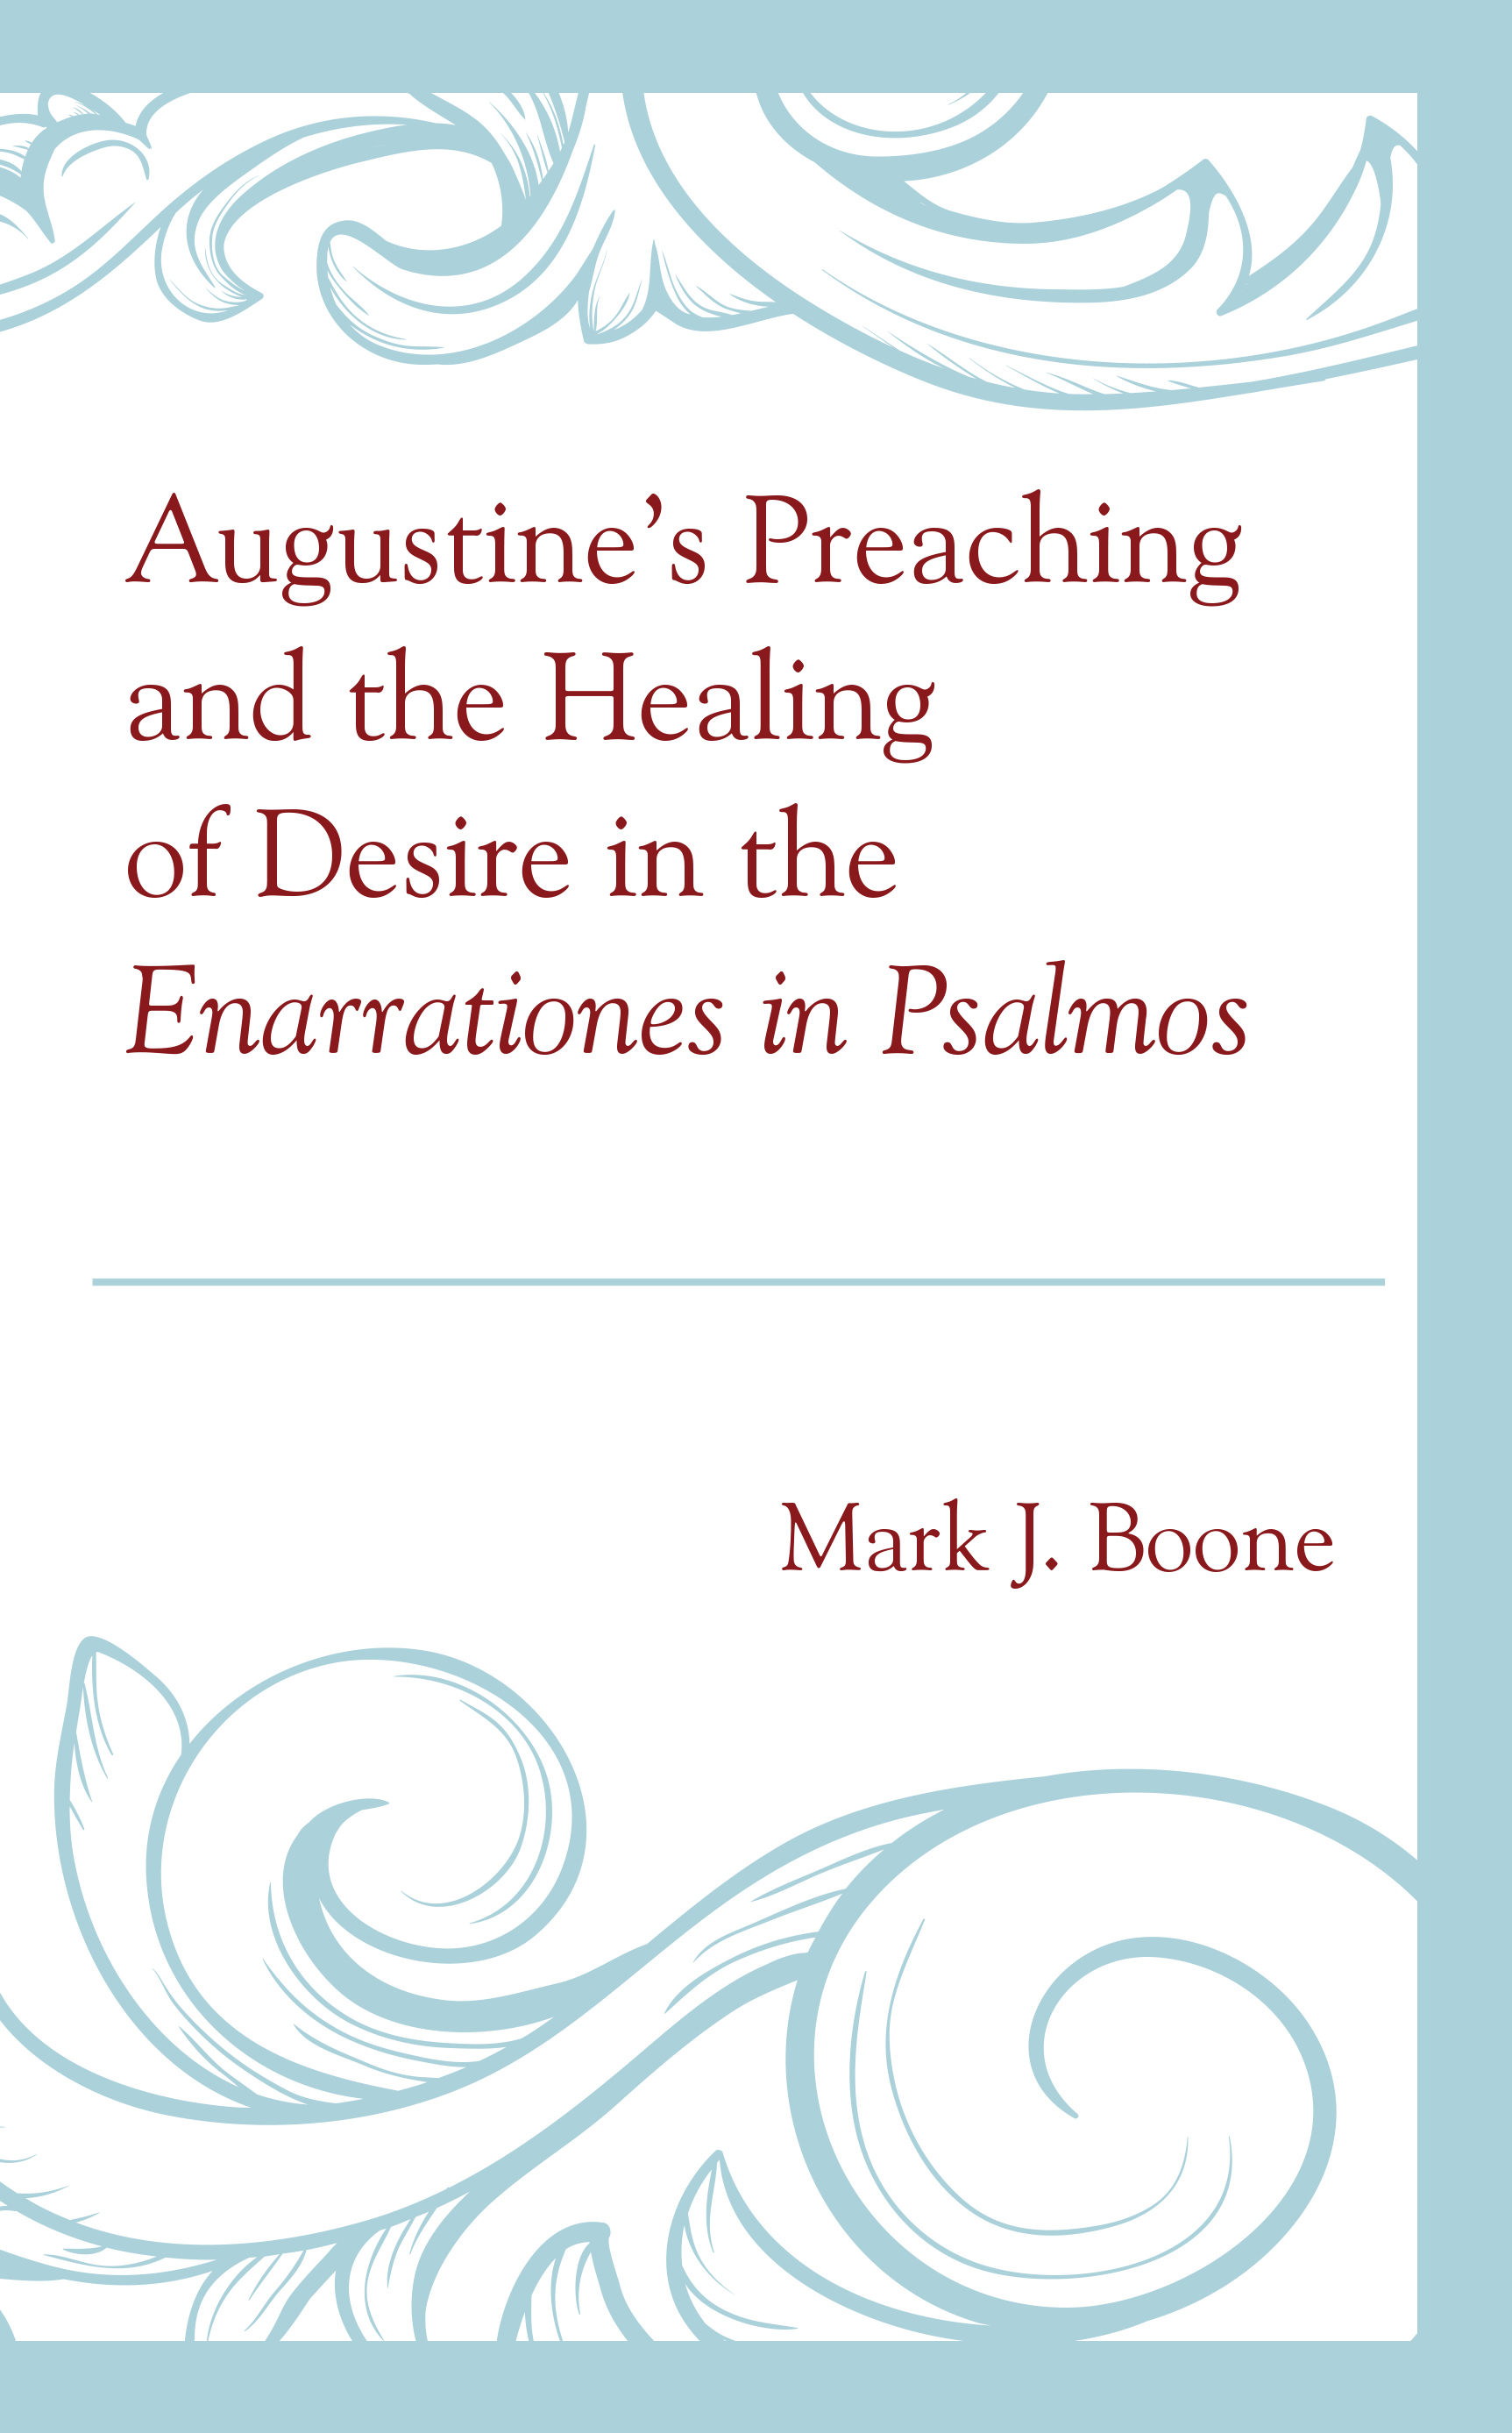 Augustine’s Preaching and the Healing of Desire in the Enarrationes in Psalmos